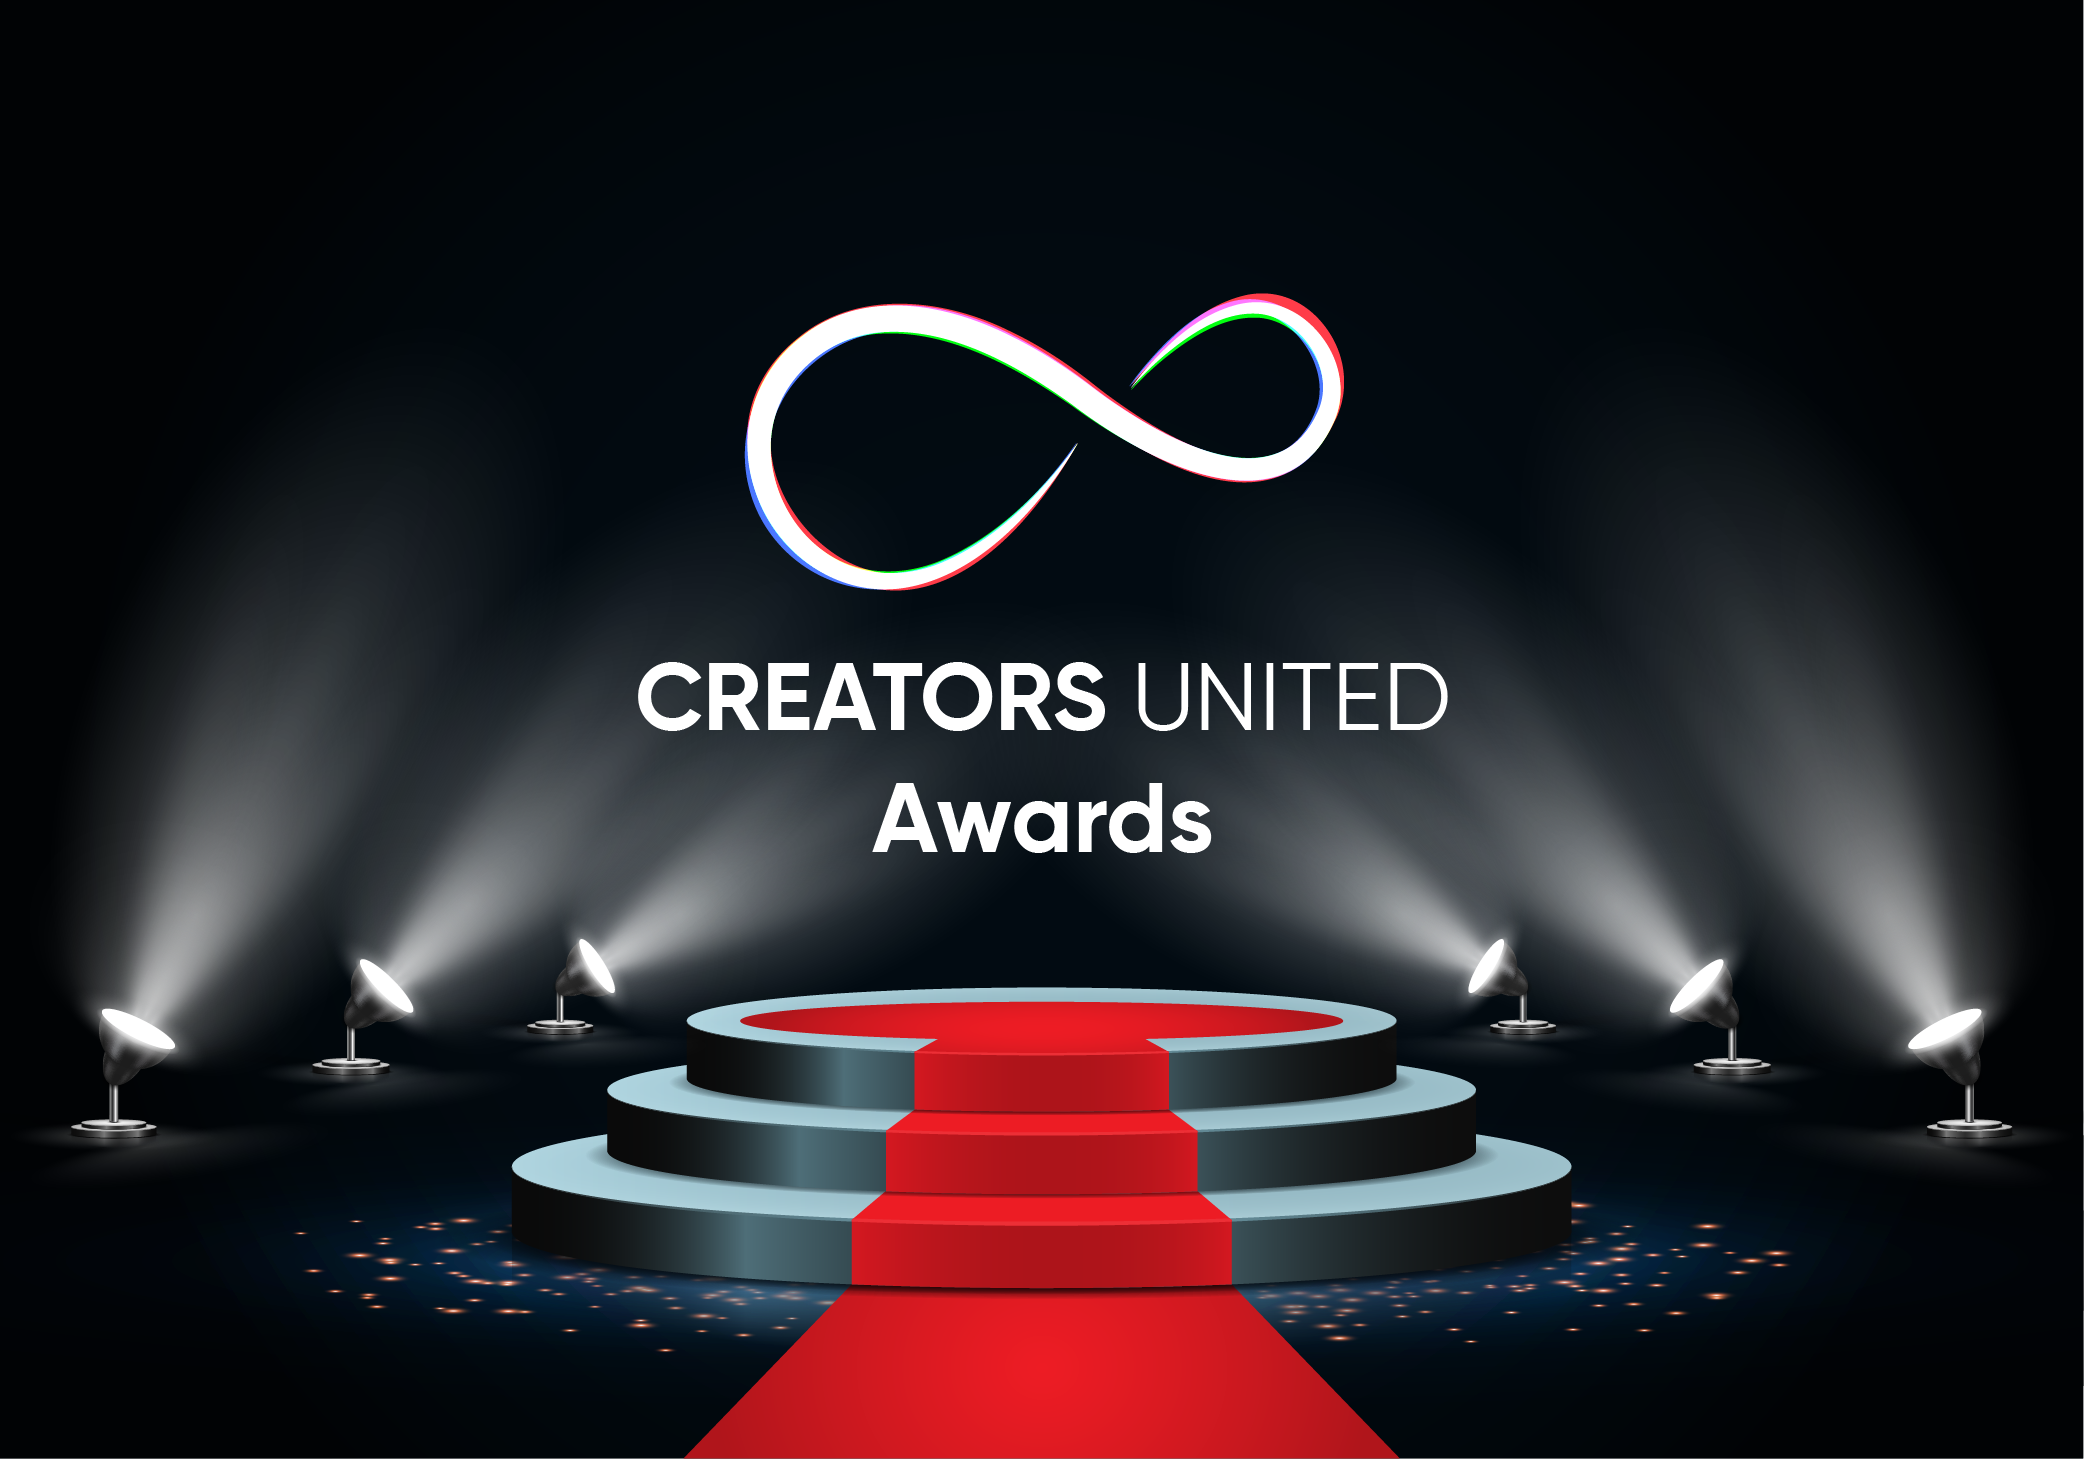 India’s first experiential festival Creators United for creators set to honor the best digital voices in India with a power-packed awards ceremony